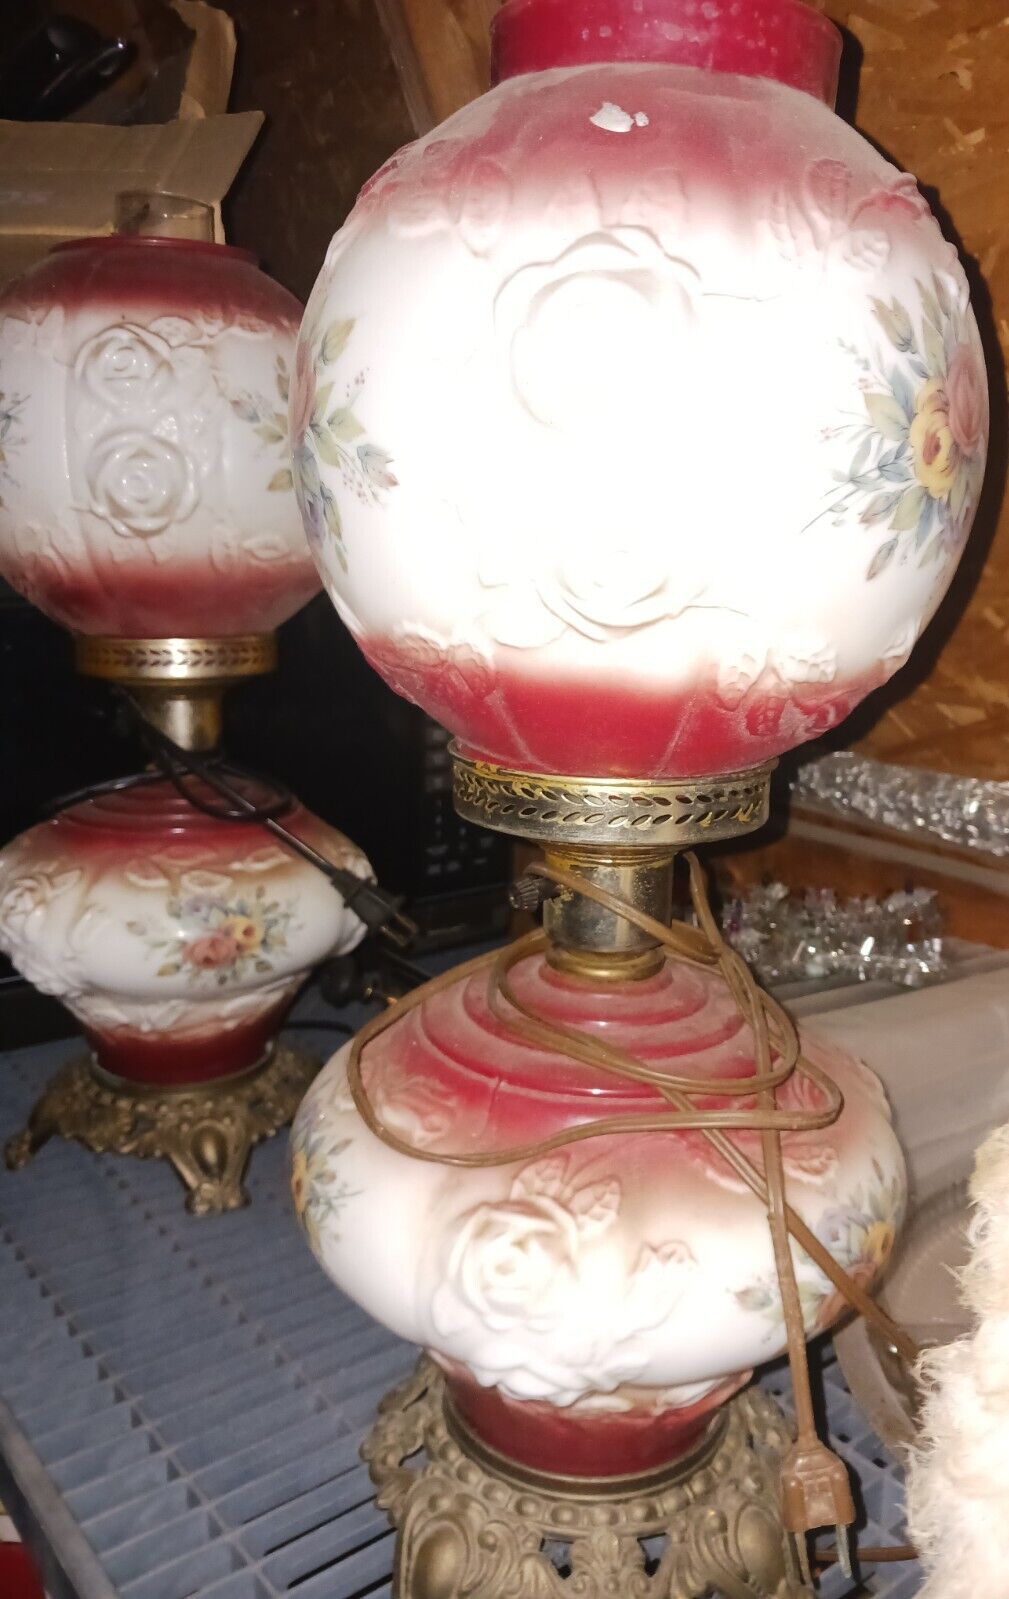 2 Red And White antique Lamps With 2 Globes And Flowers Like GWTW,both Work Good